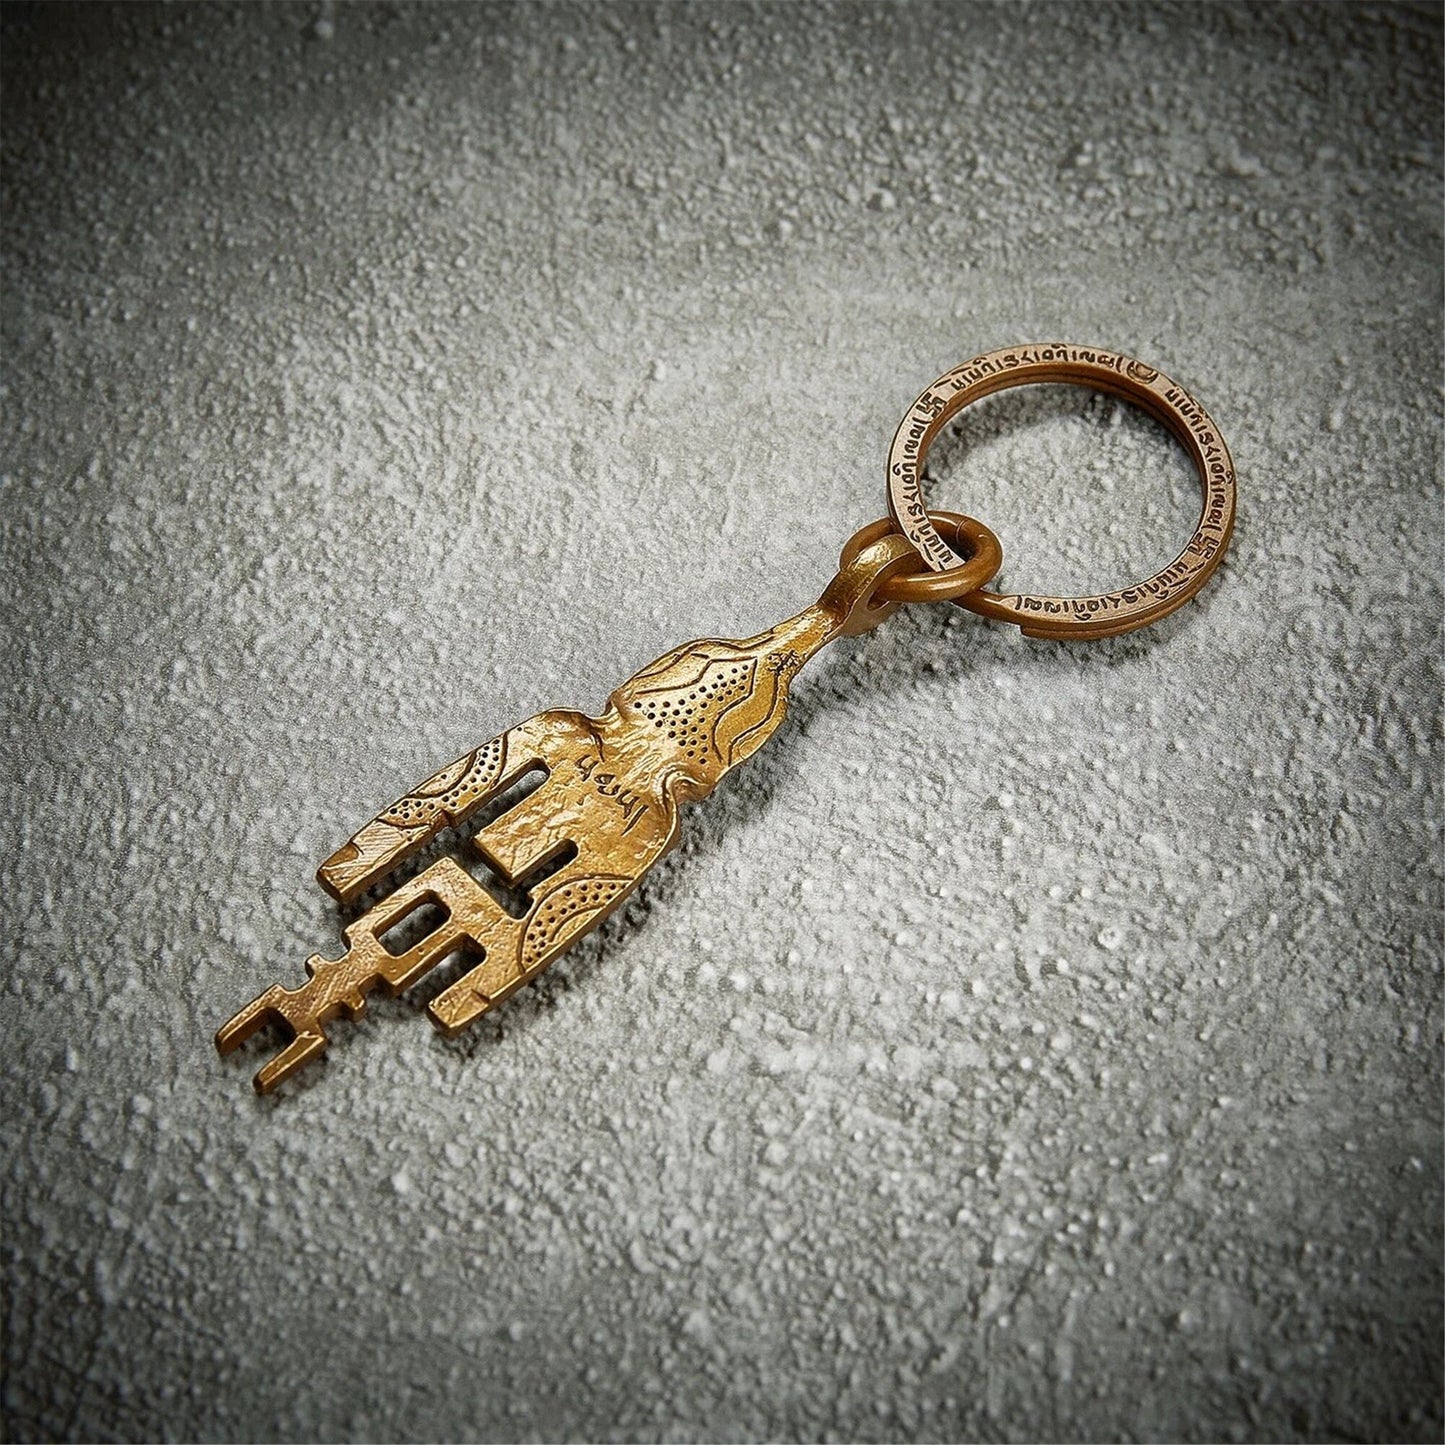 Gandhanra Antique Tibetan Amulet Keychain,The Key of Heart, Trantic Buddhism Dharma, Himalayan Style Pendant,Made of Pure Brass